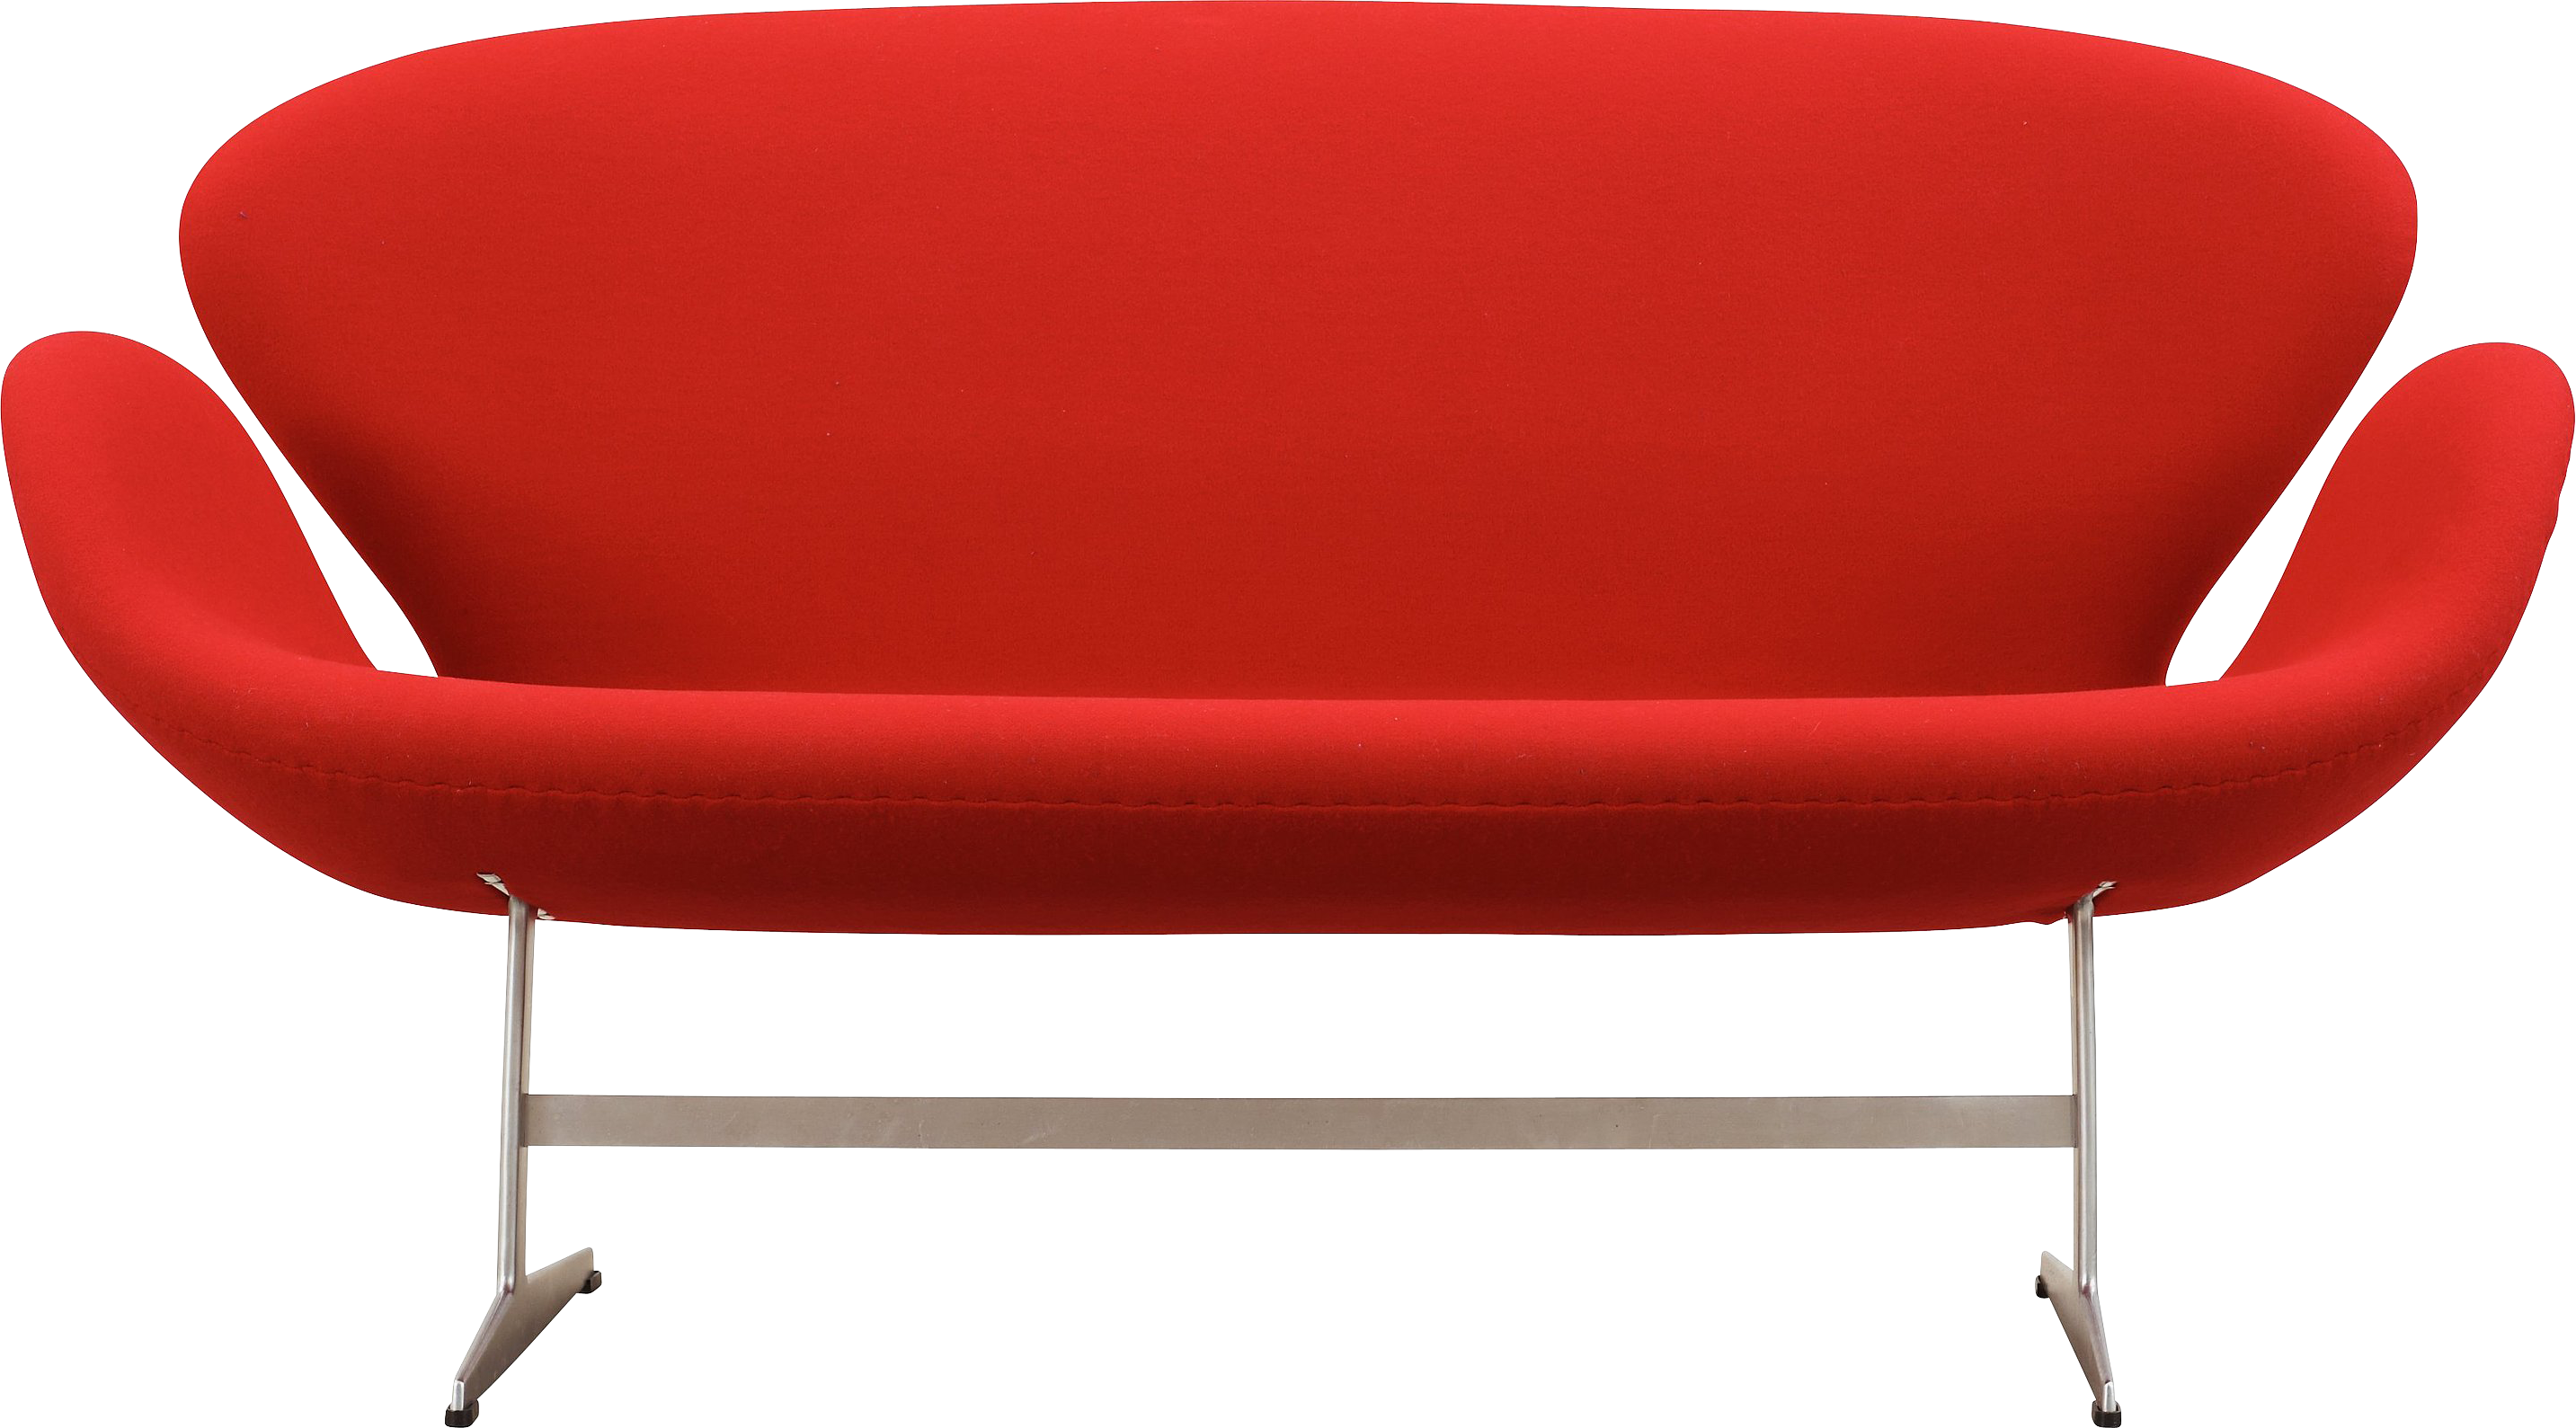 Luxury Chaise Longue Free PNG Image